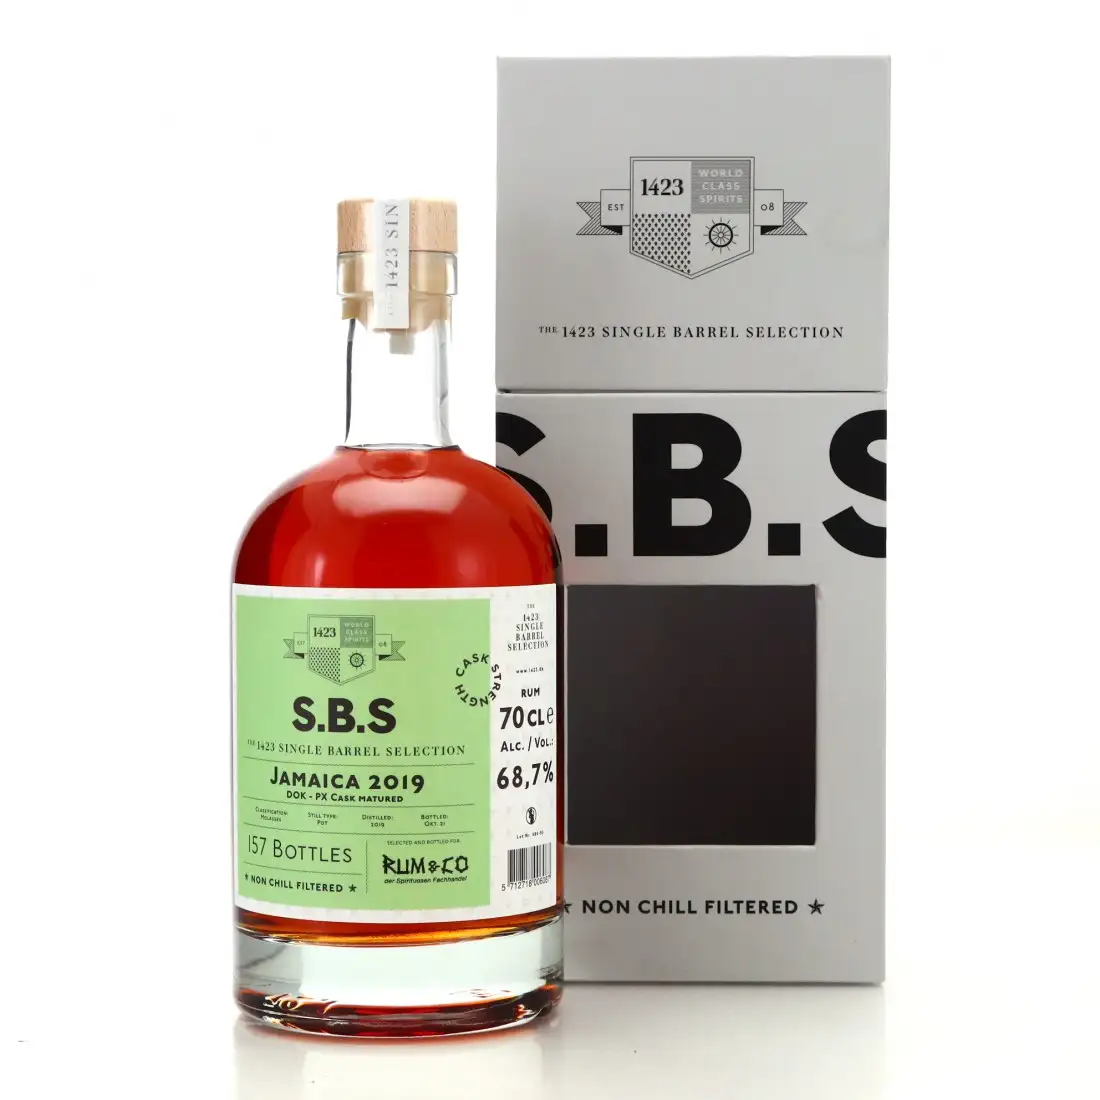 Image of the front of the bottle of the rum S.B.S Jamaica (Rum & Co) DOK